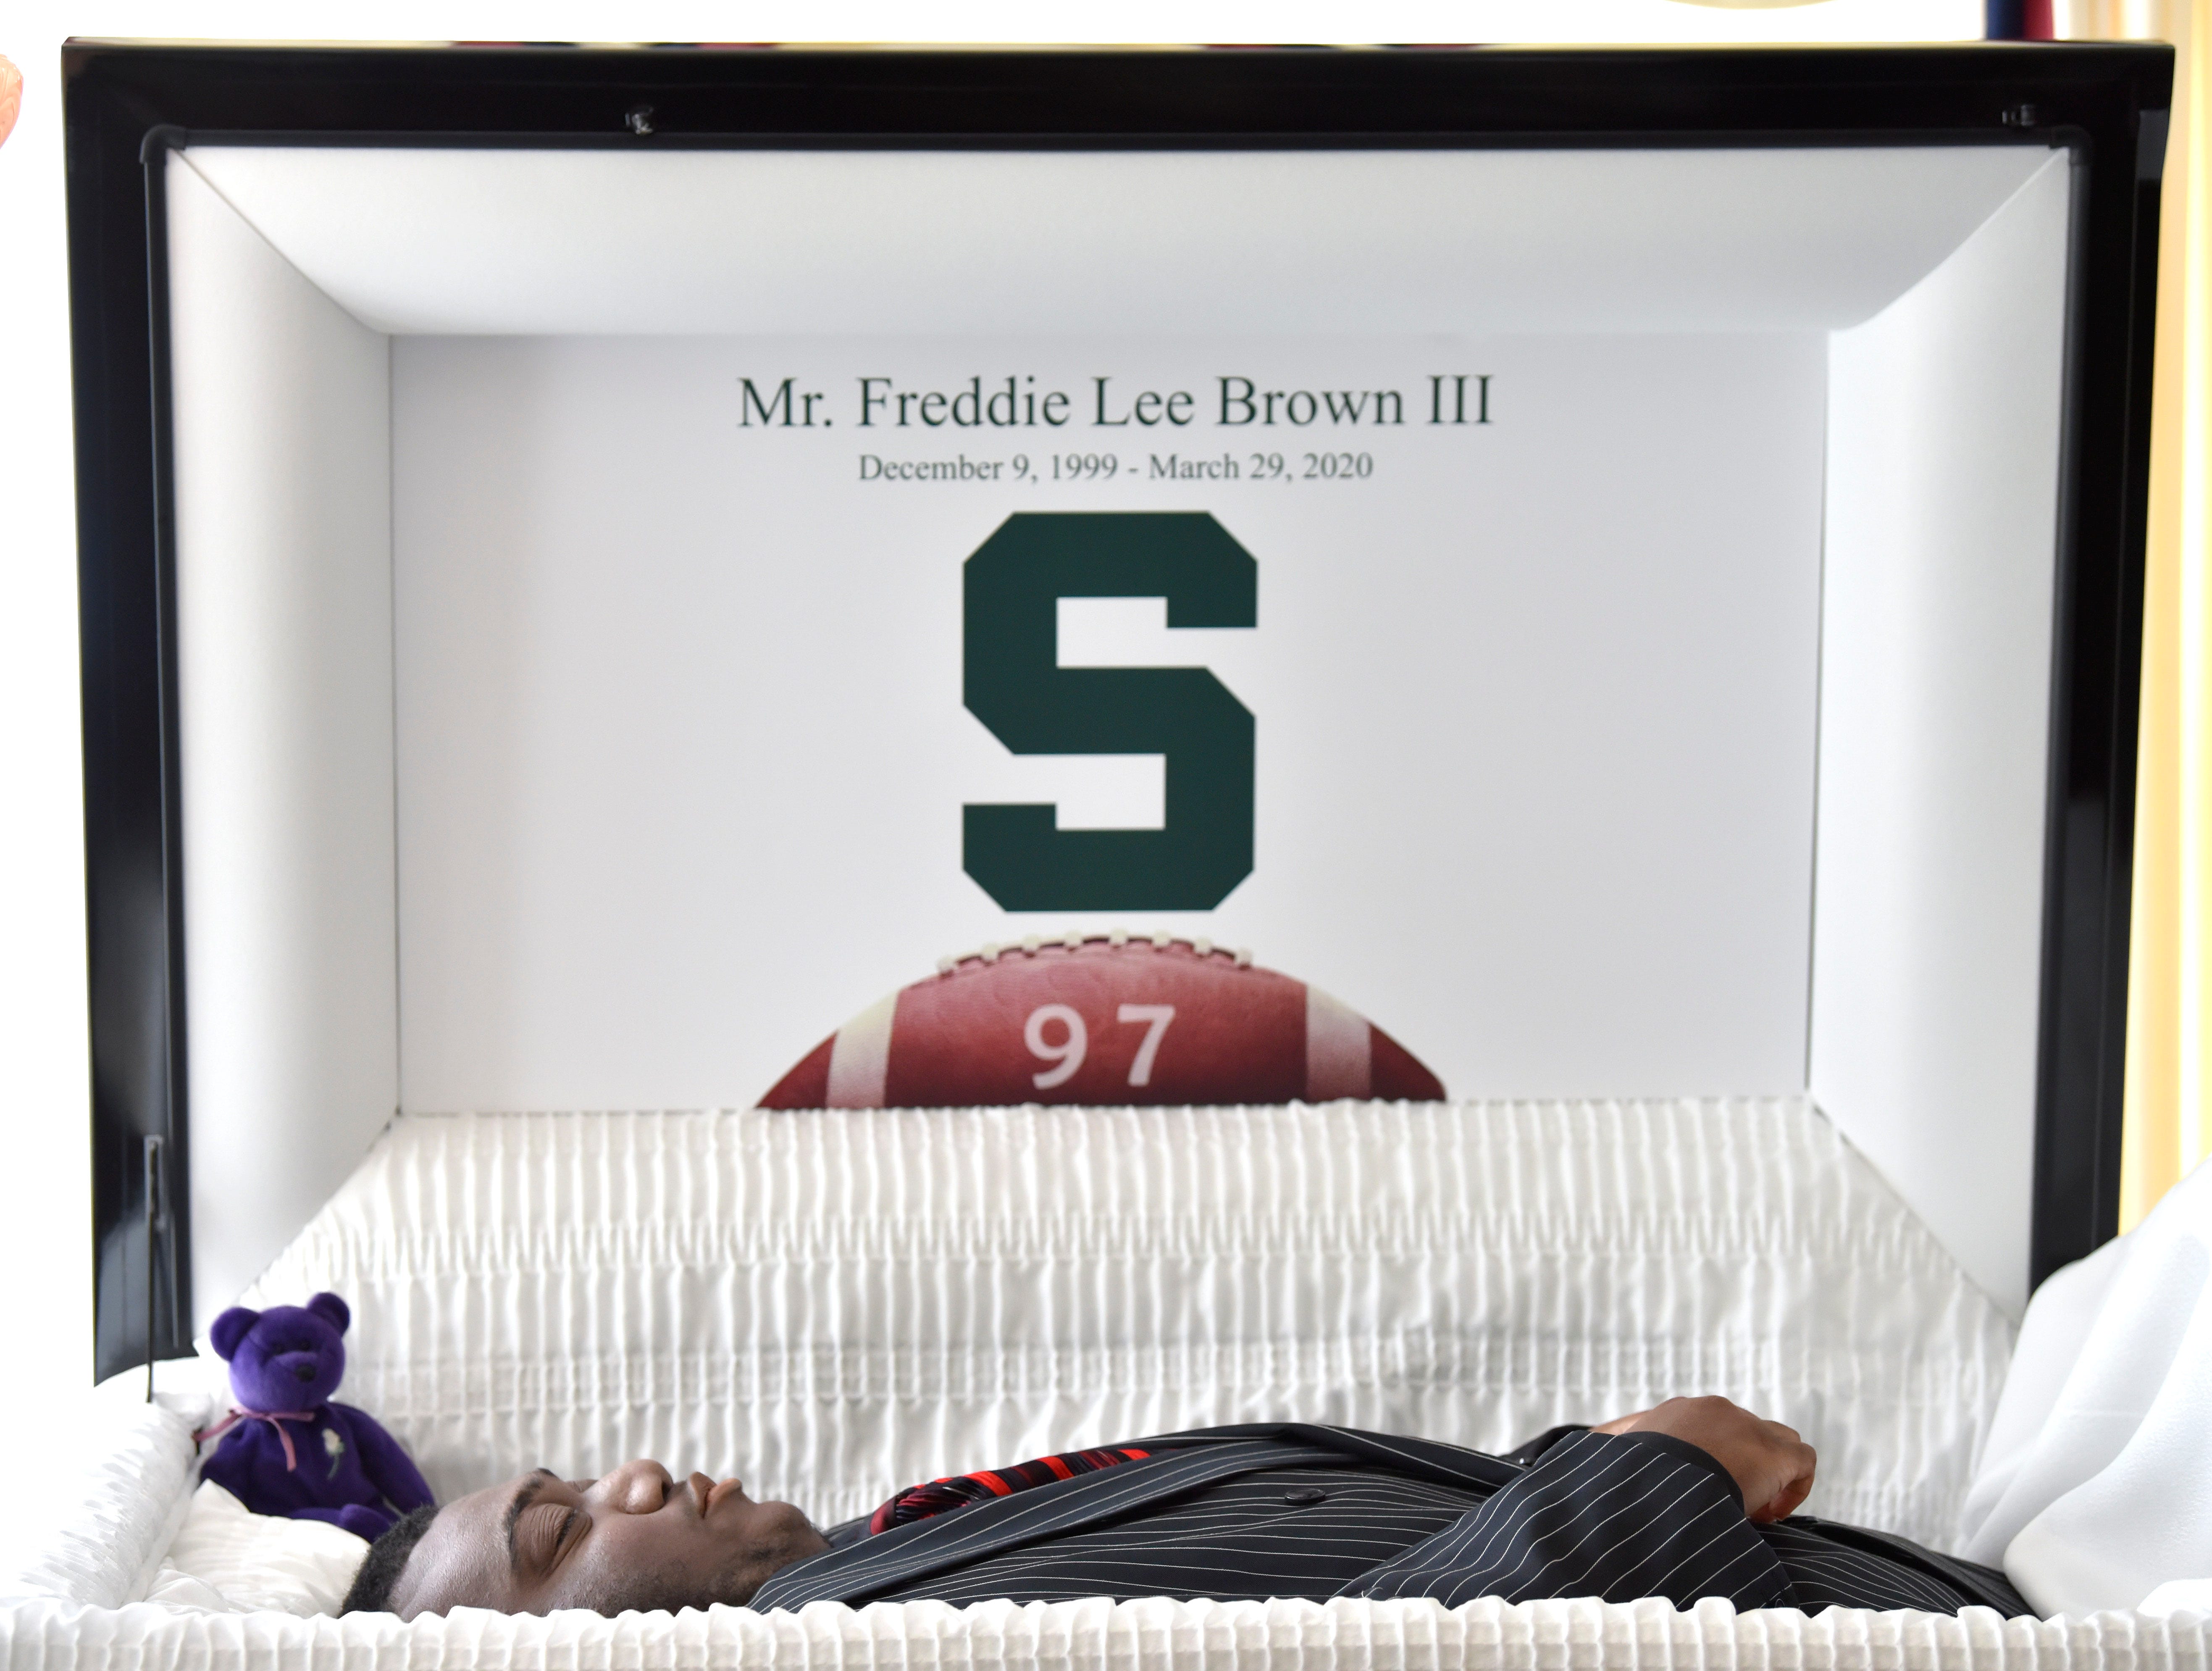 A Michigan State University block " S " and his Grand Blanc High School No. 97 are seen on the casket lid of Freddie Lee Brown III. According to family members, Brown III dreamed of playing football at MSU as a walk-on with hopes of someday playing in the NFL.